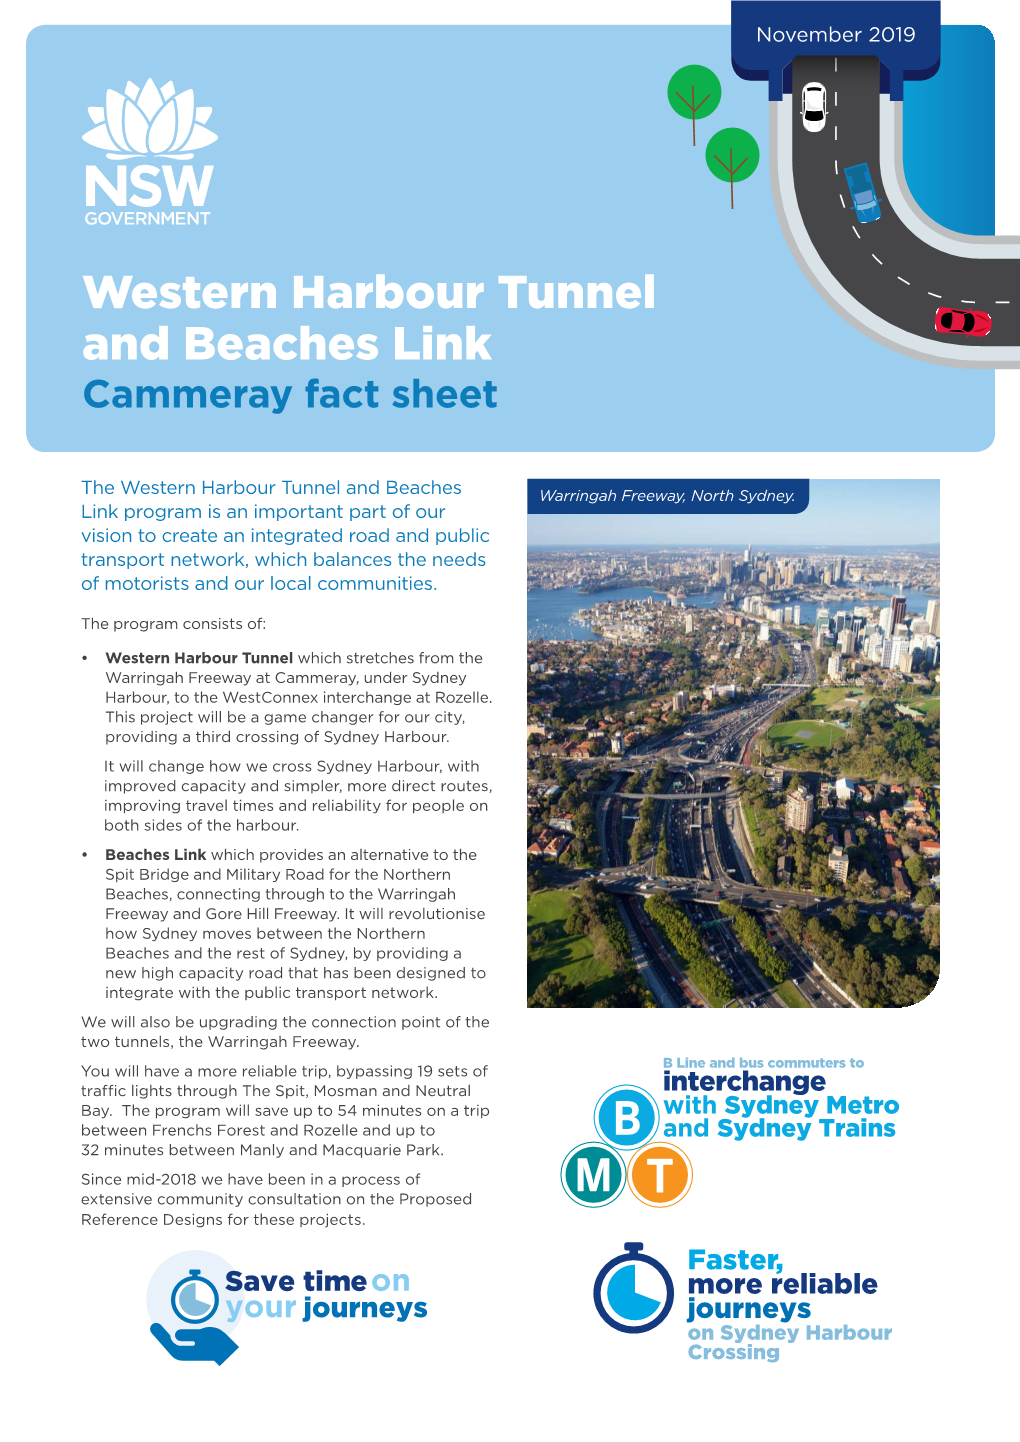 Western Harbour Tunnel and Beaches Link Cammeray Fact Sheet